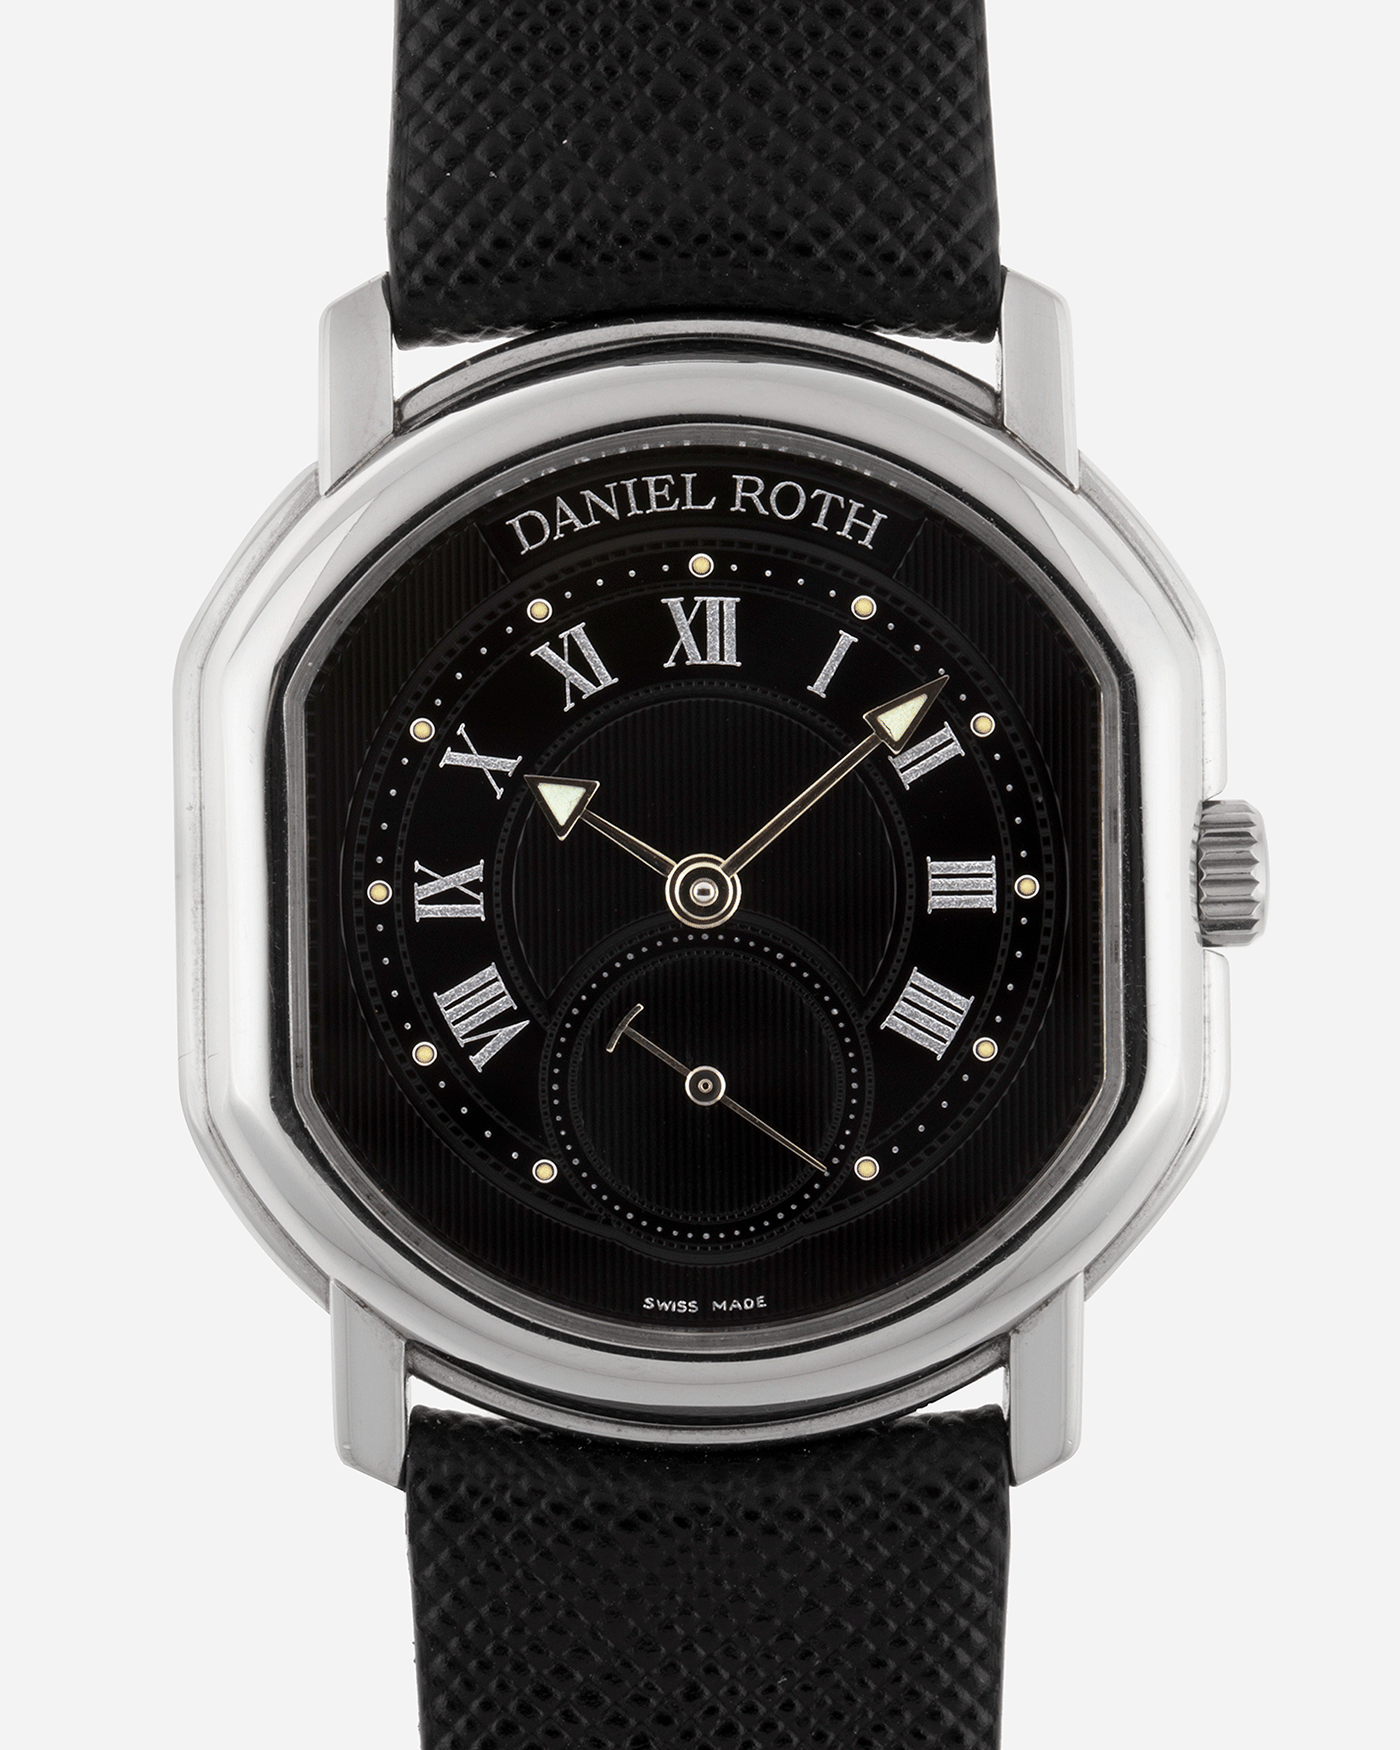 Brand: Daniel Roth Year: 2002 Model: Small Seconds Material: Stainless Steel Case Diameter: 35mmX38mm Bracelet/Strap: JPM X S.SONG Black Saffiano and Stainless Steel Daniel Roth Tang Buckle